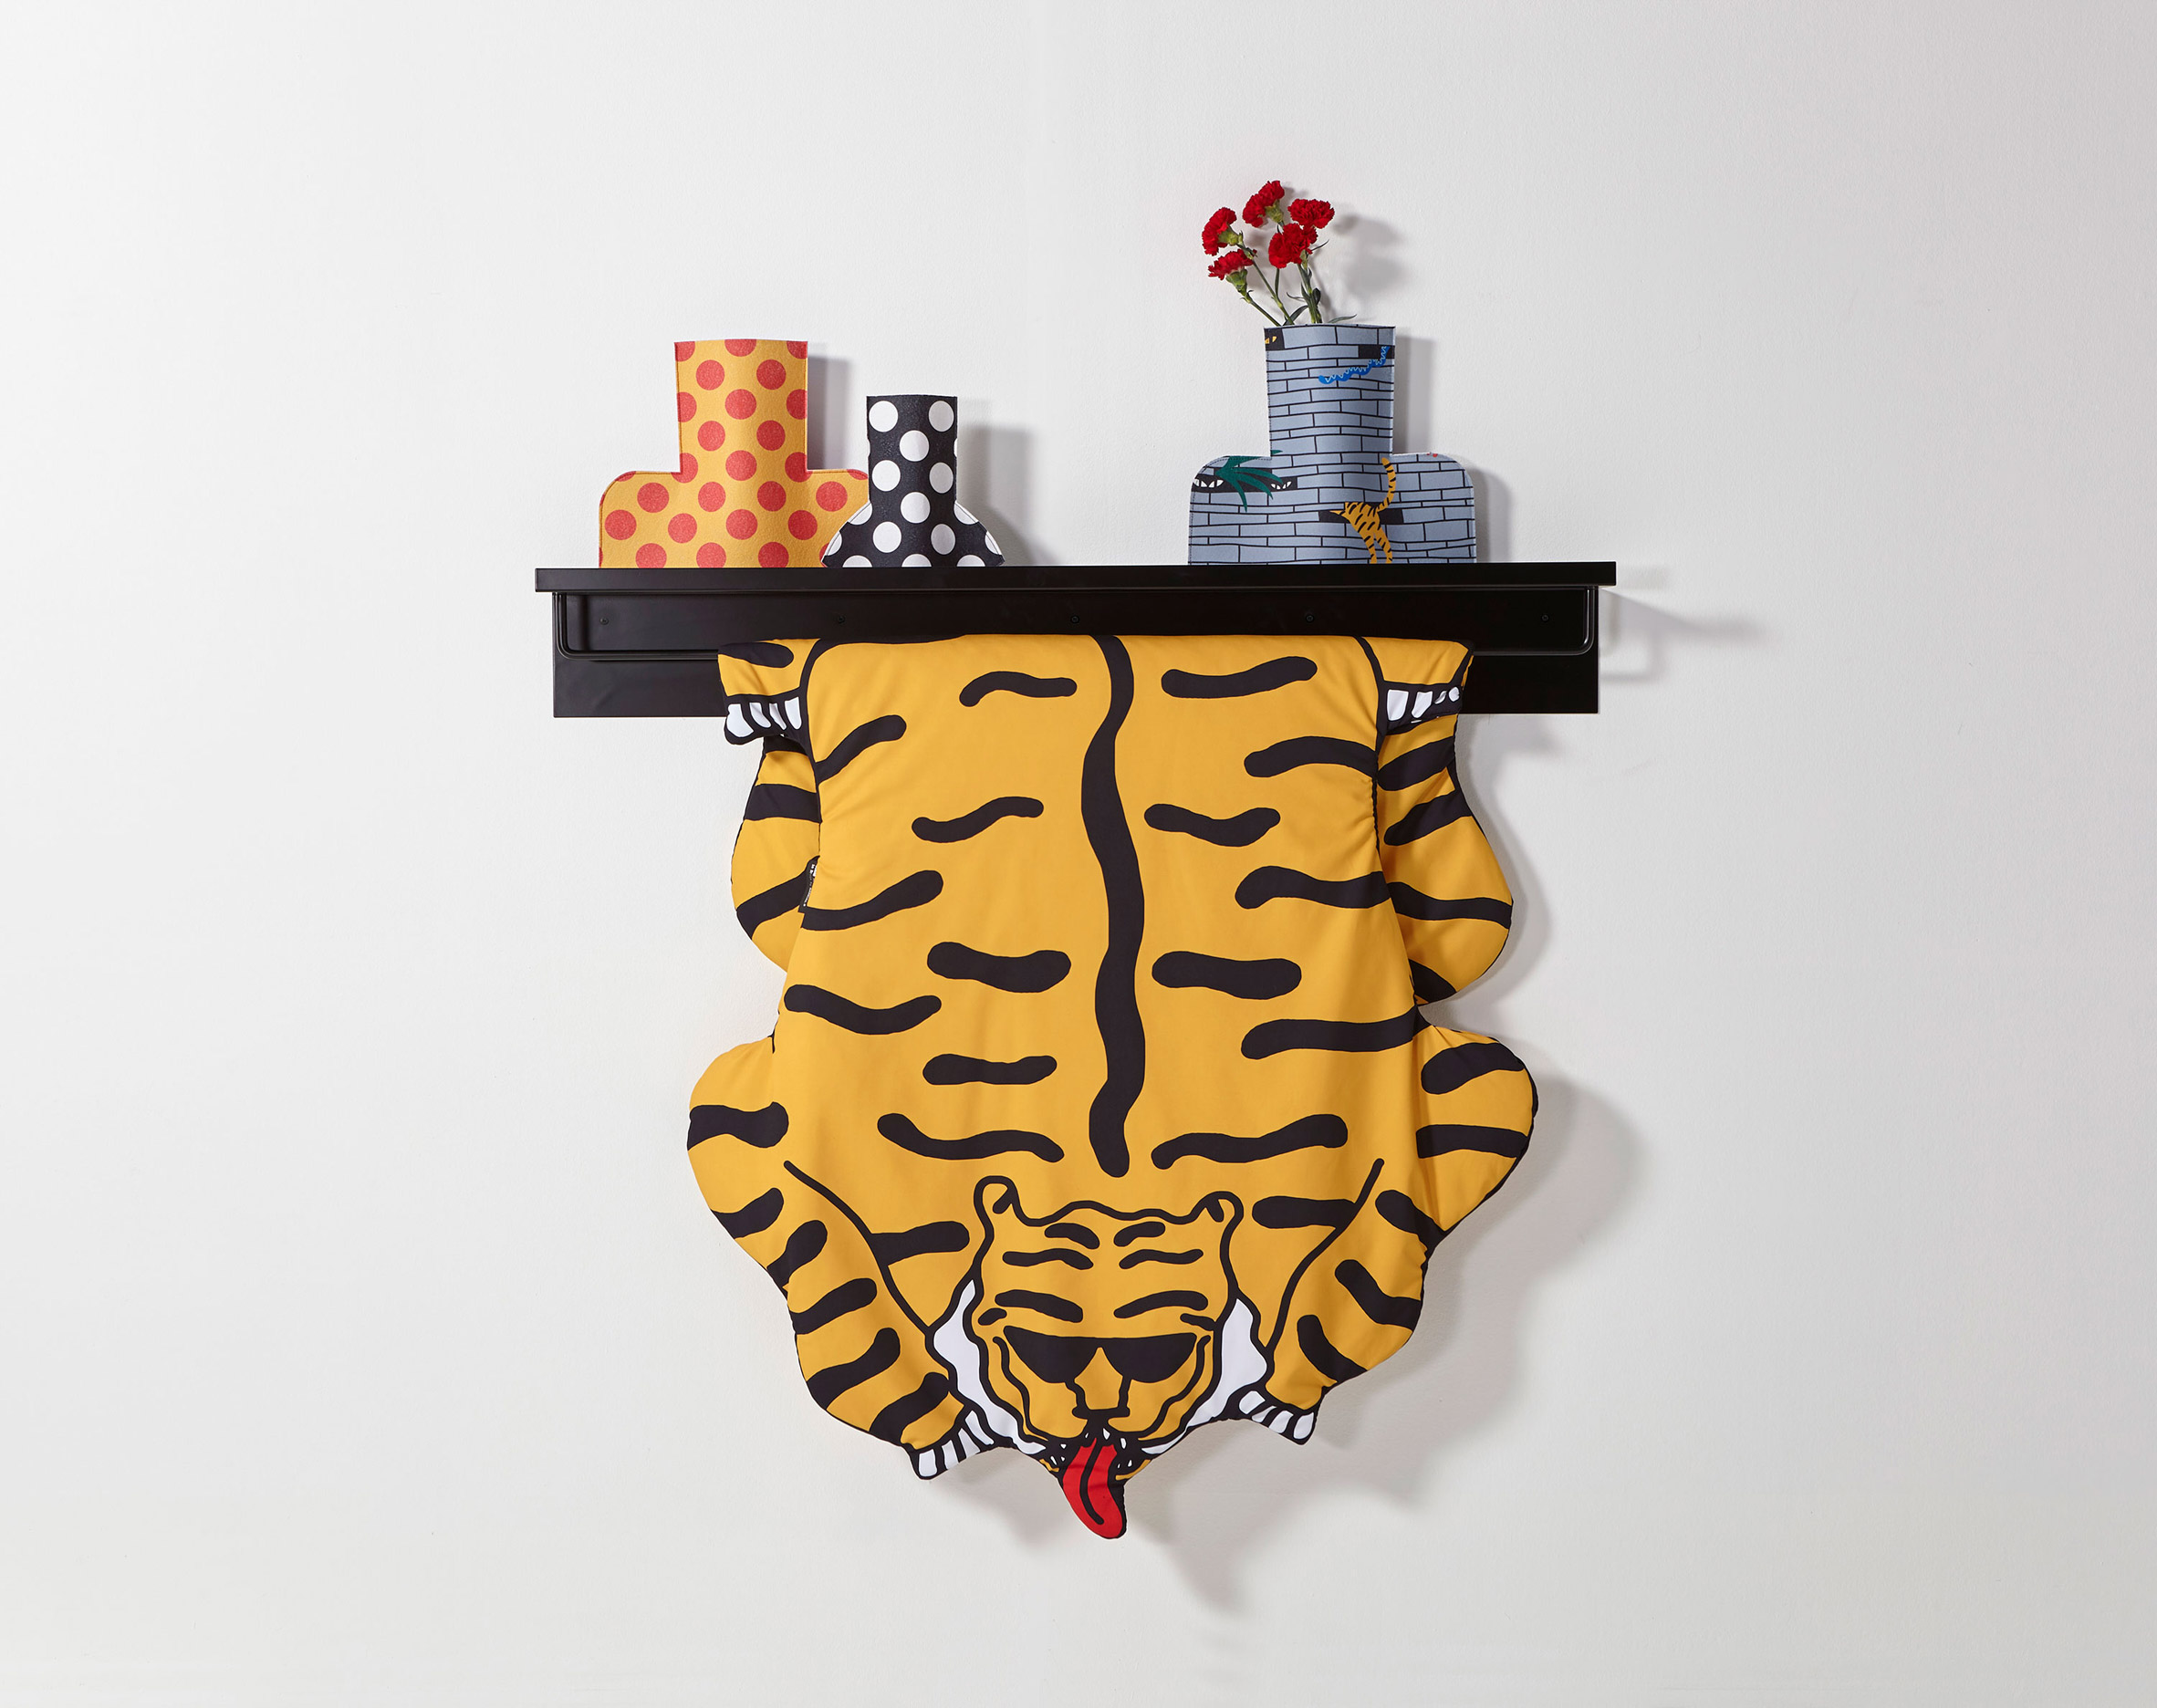 Egle Zvirblyte creates blankets for Sancal patterned with tigers and bananas